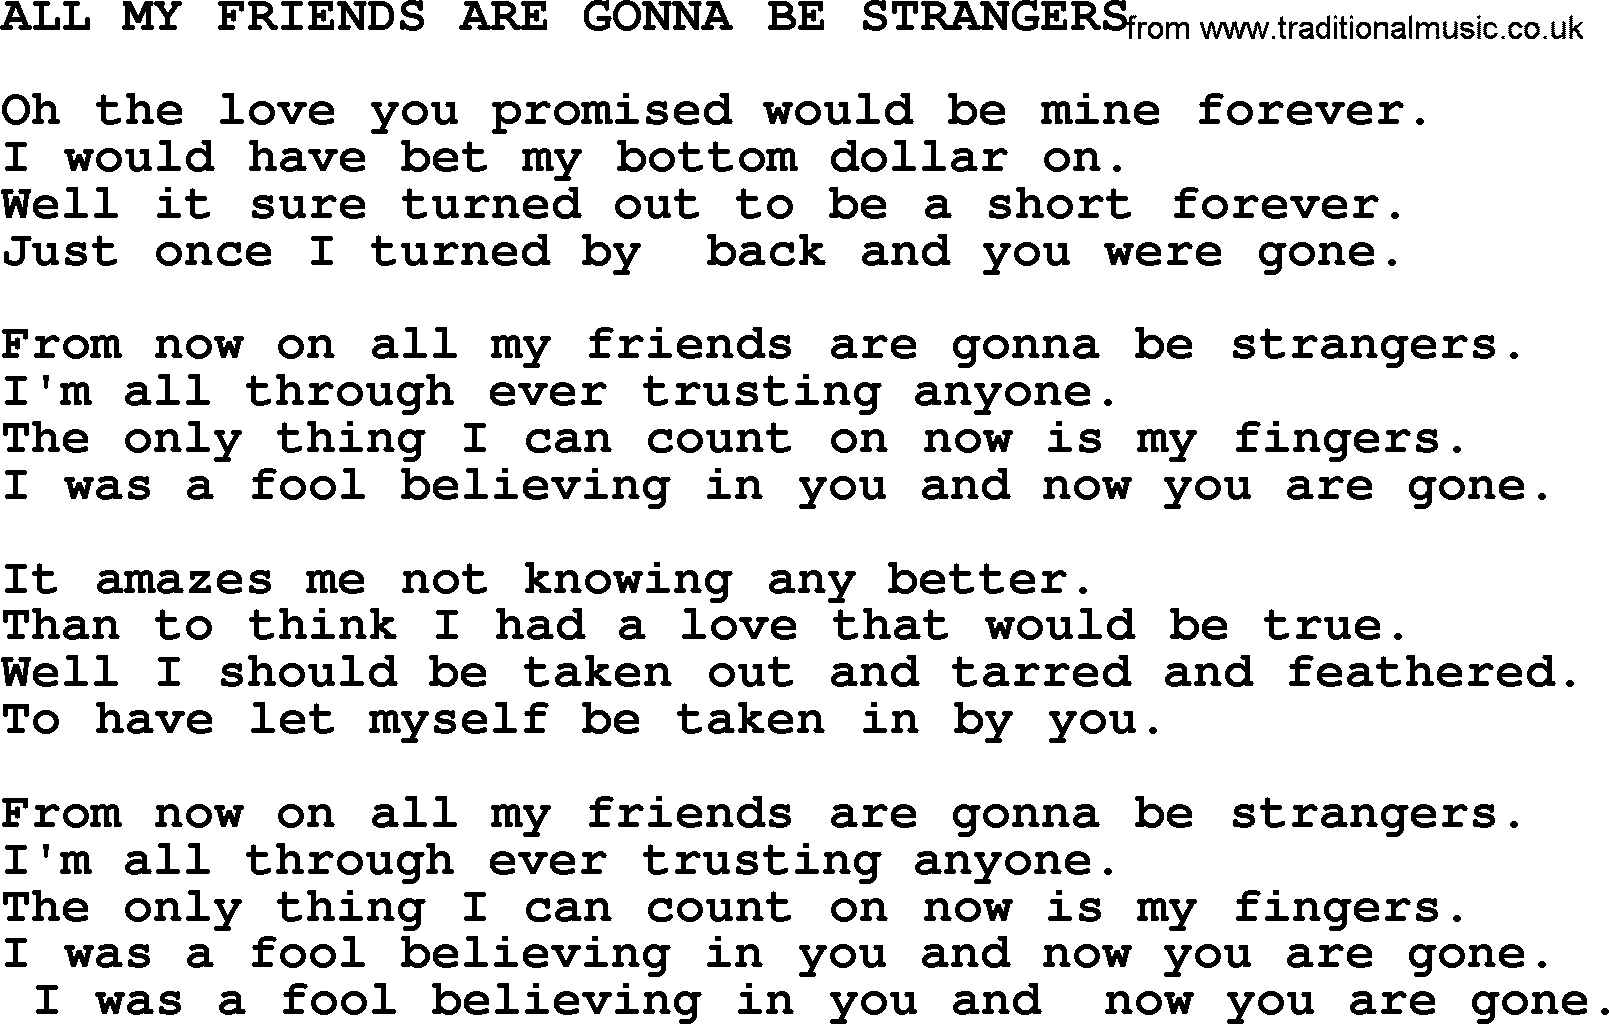 Merle Haggard song: All My Friends Are Gonna Be Strangers, lyrics.